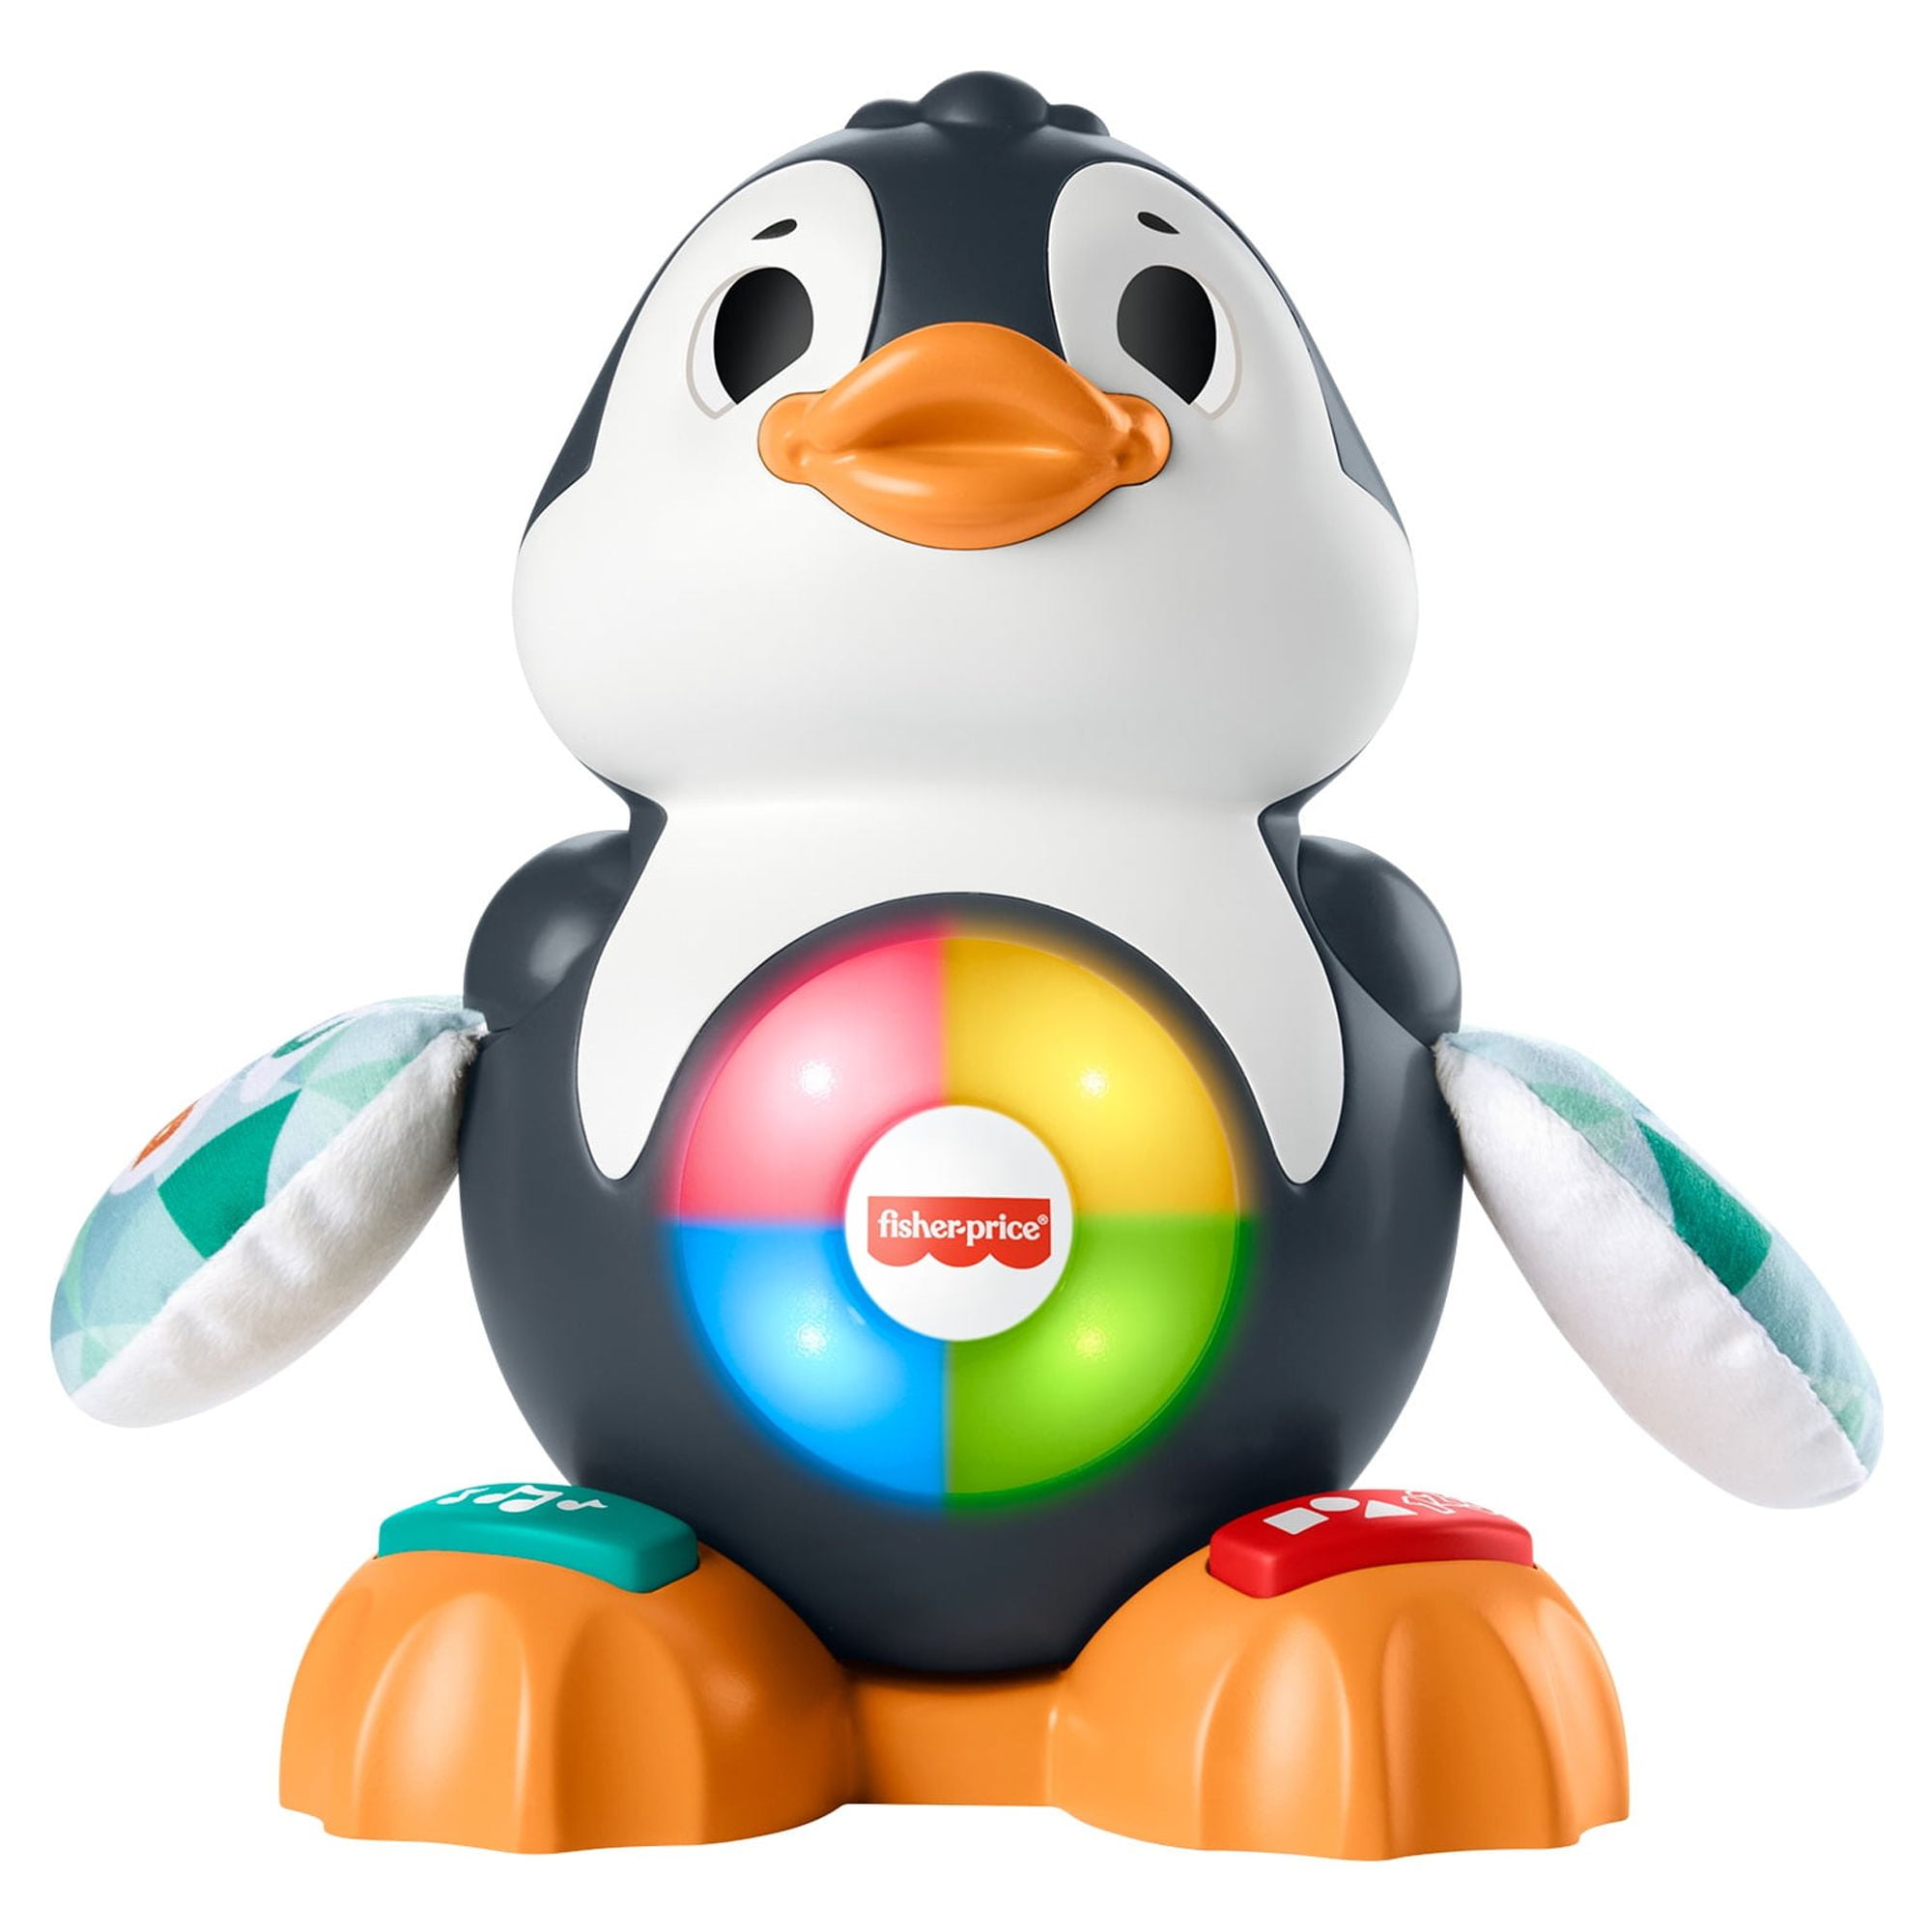 Fisher-Price Linkimals Cool Beats Penguin Learning Toy $21 + Free Shipping w/ Walmart+ or on $35+